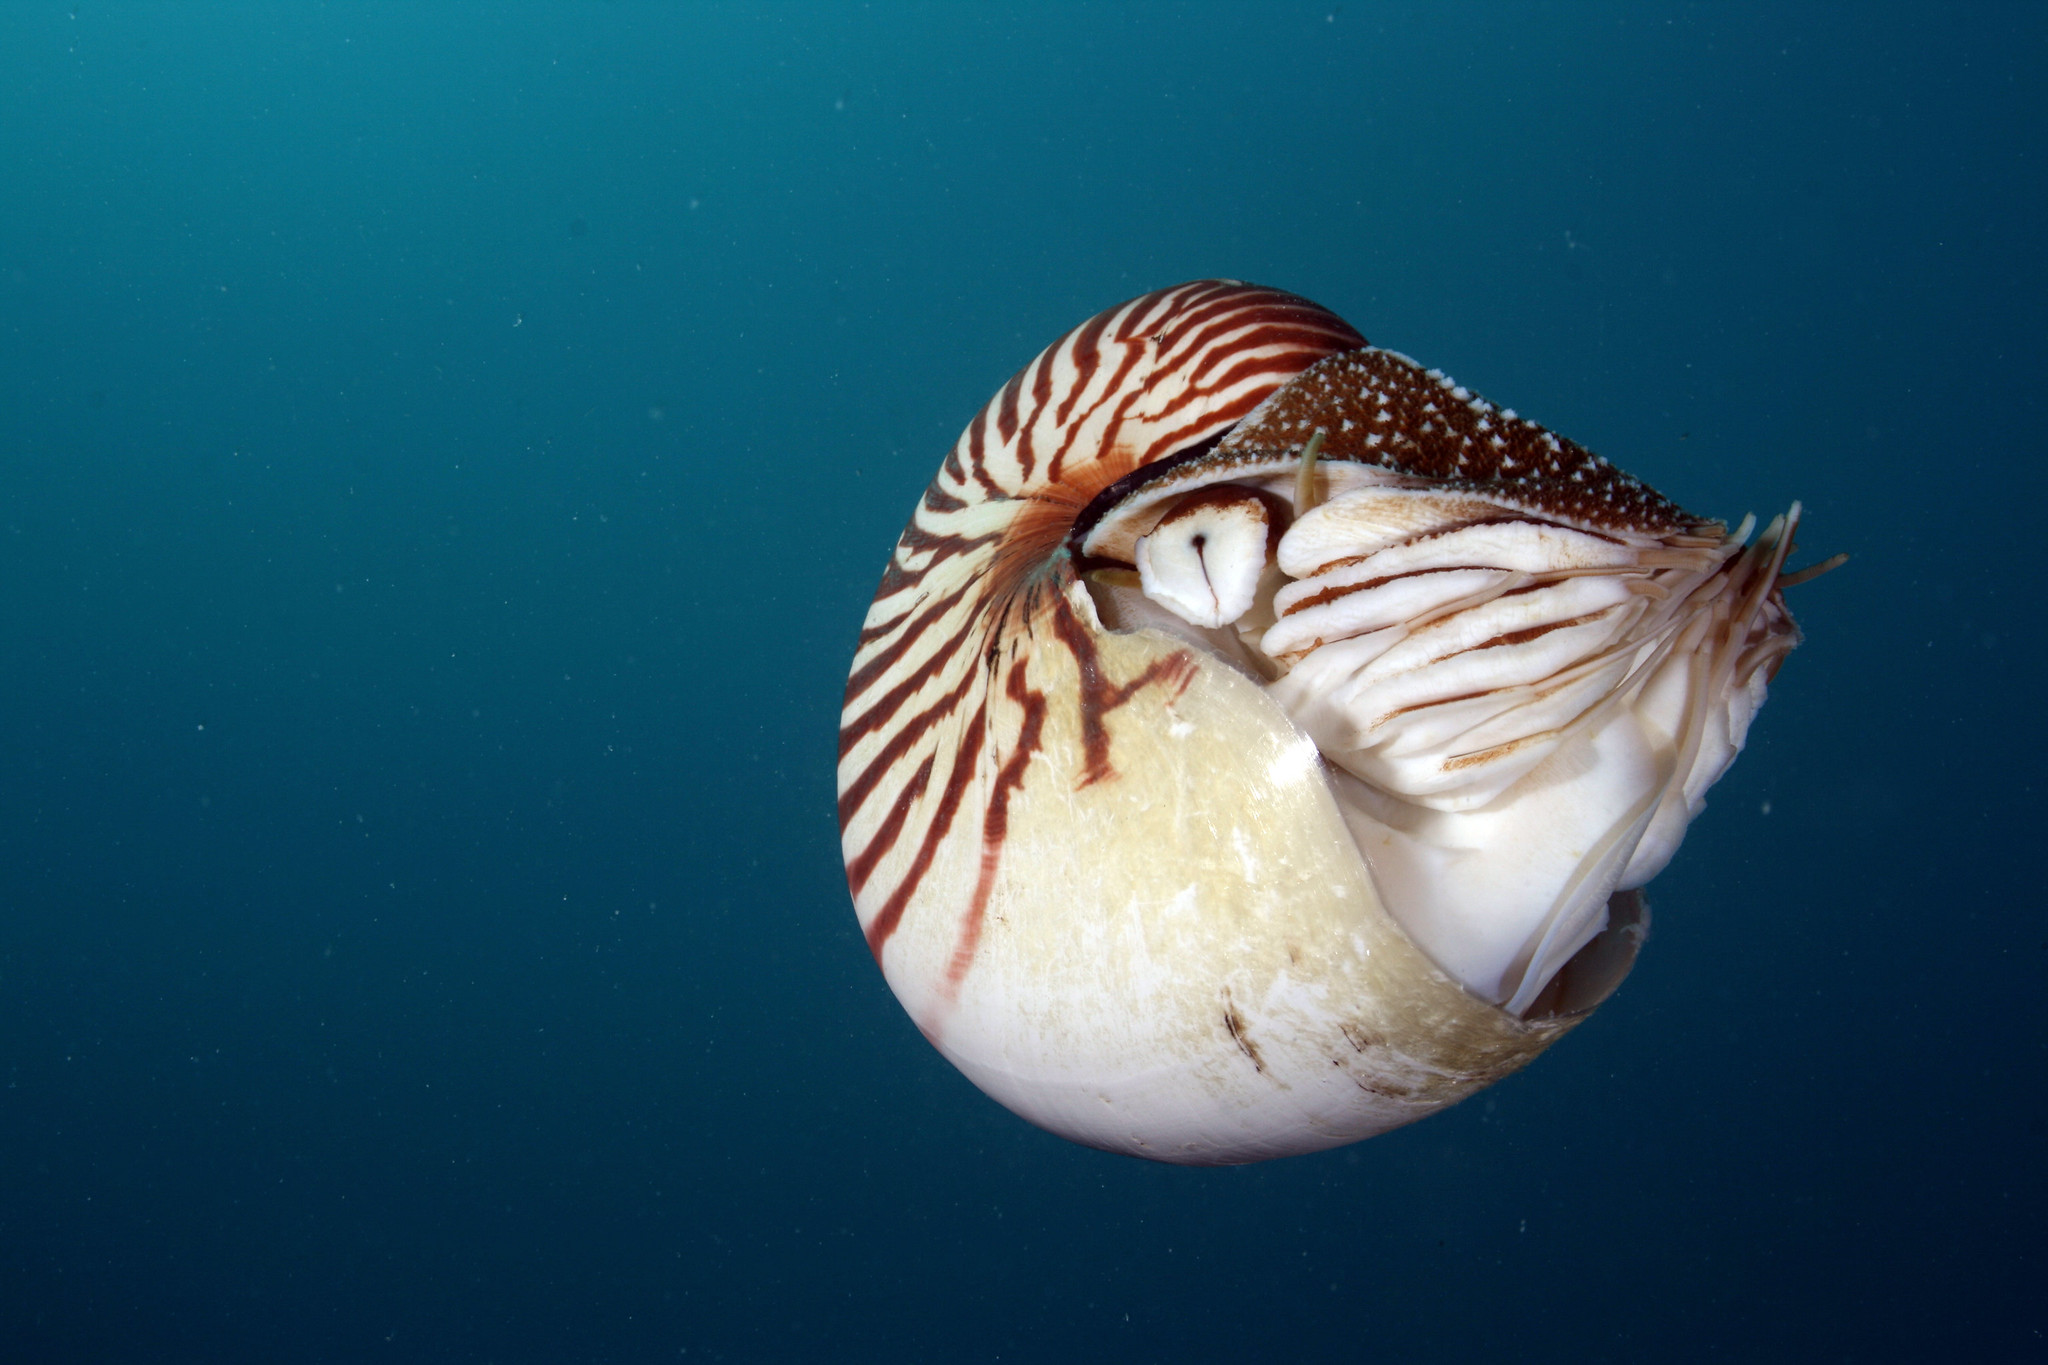 A nautilus swimming in the ocean, one of the oldest prehistoric sea creatures still alive today and now at risk of extinction